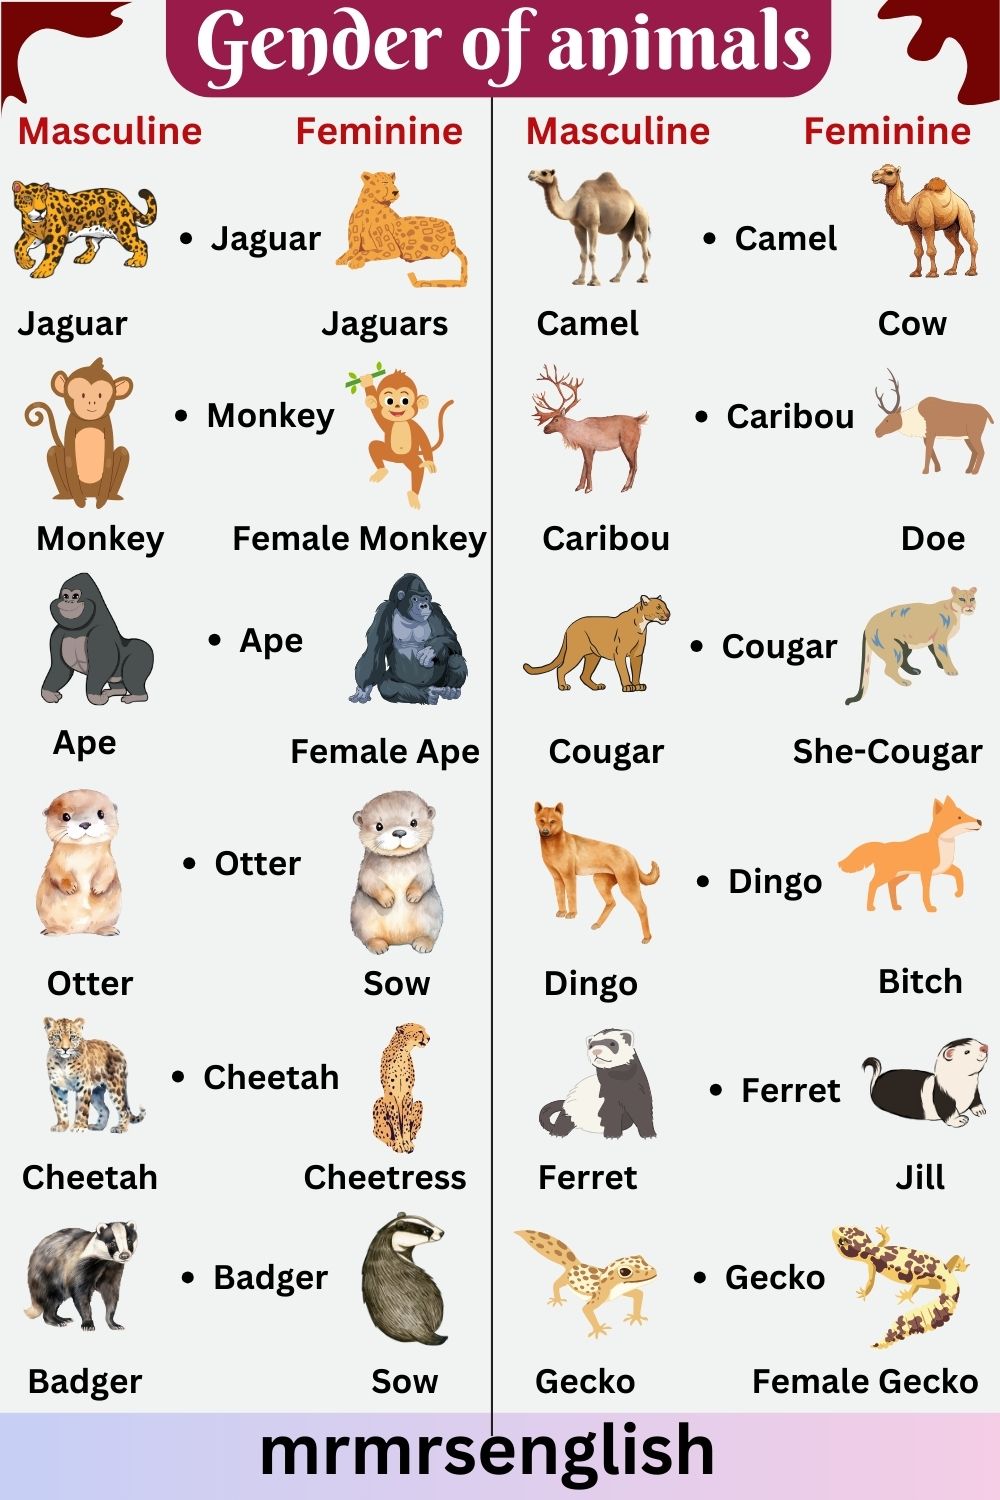 Masculine and Feminine Gender of Animals in English